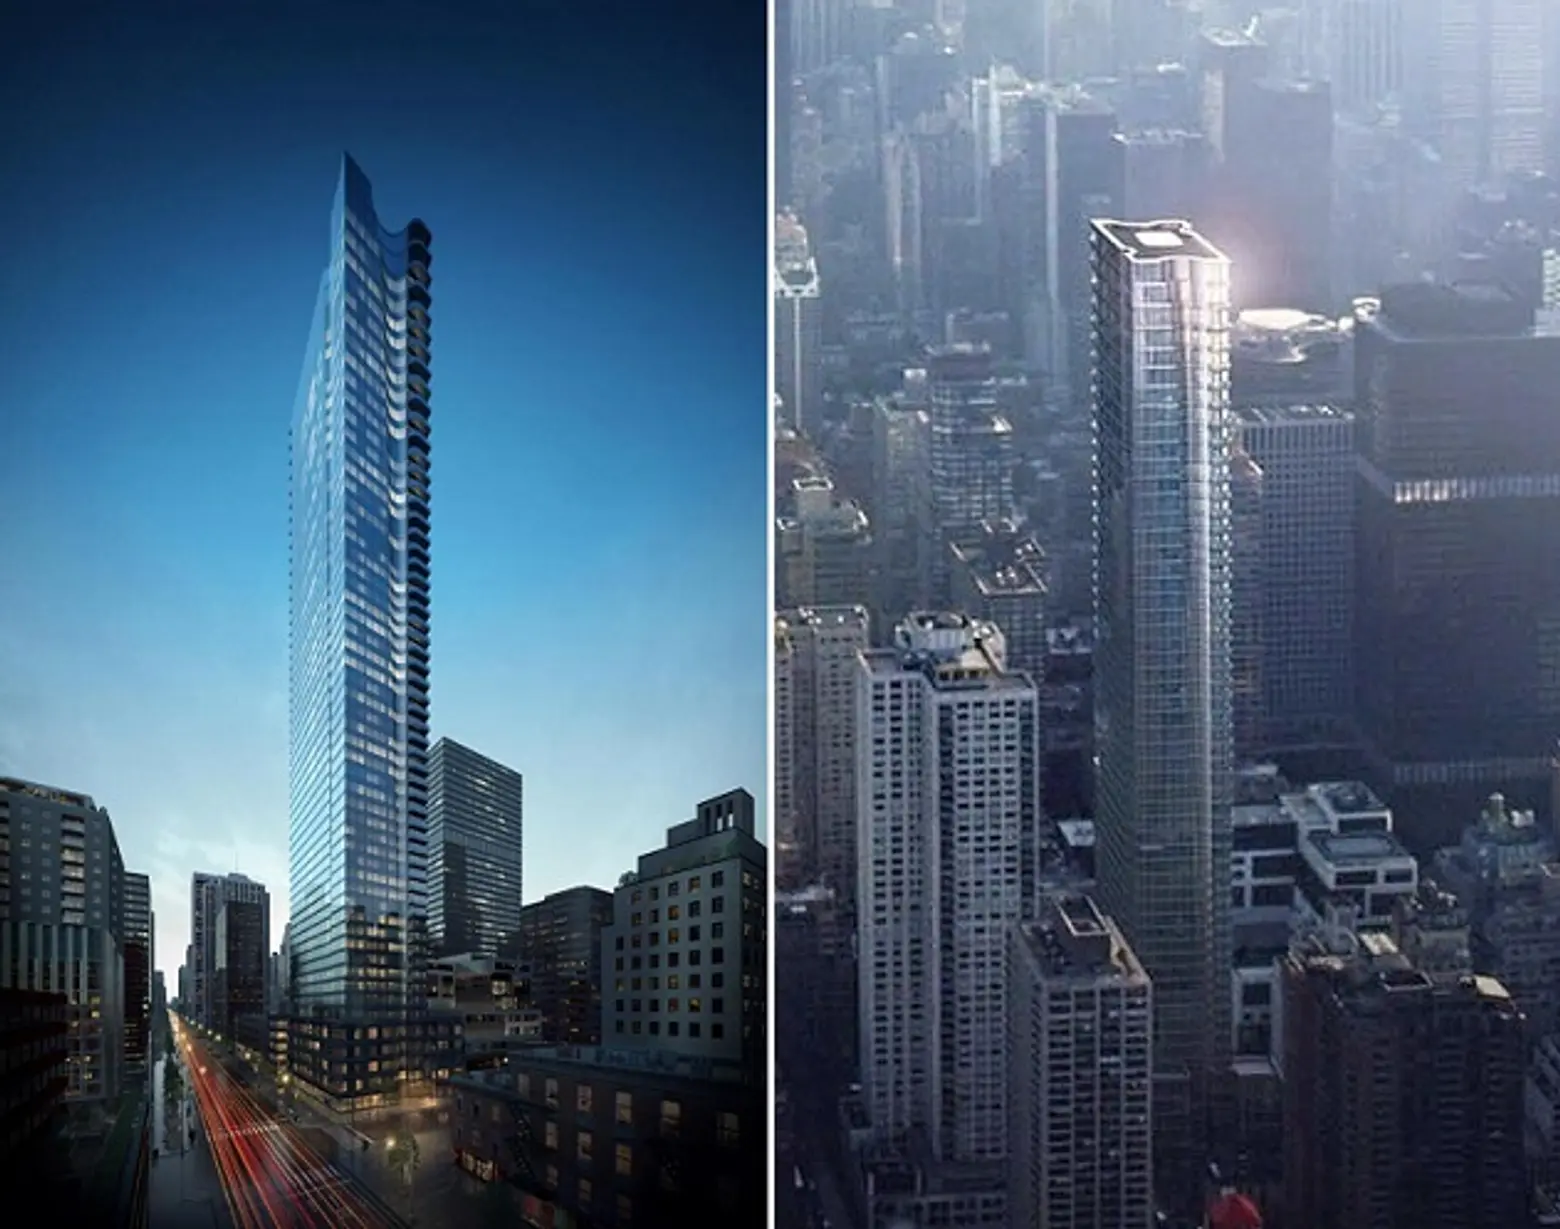 Construction Update: SOM's 252 East 57th Street Getting Its Glass Skin